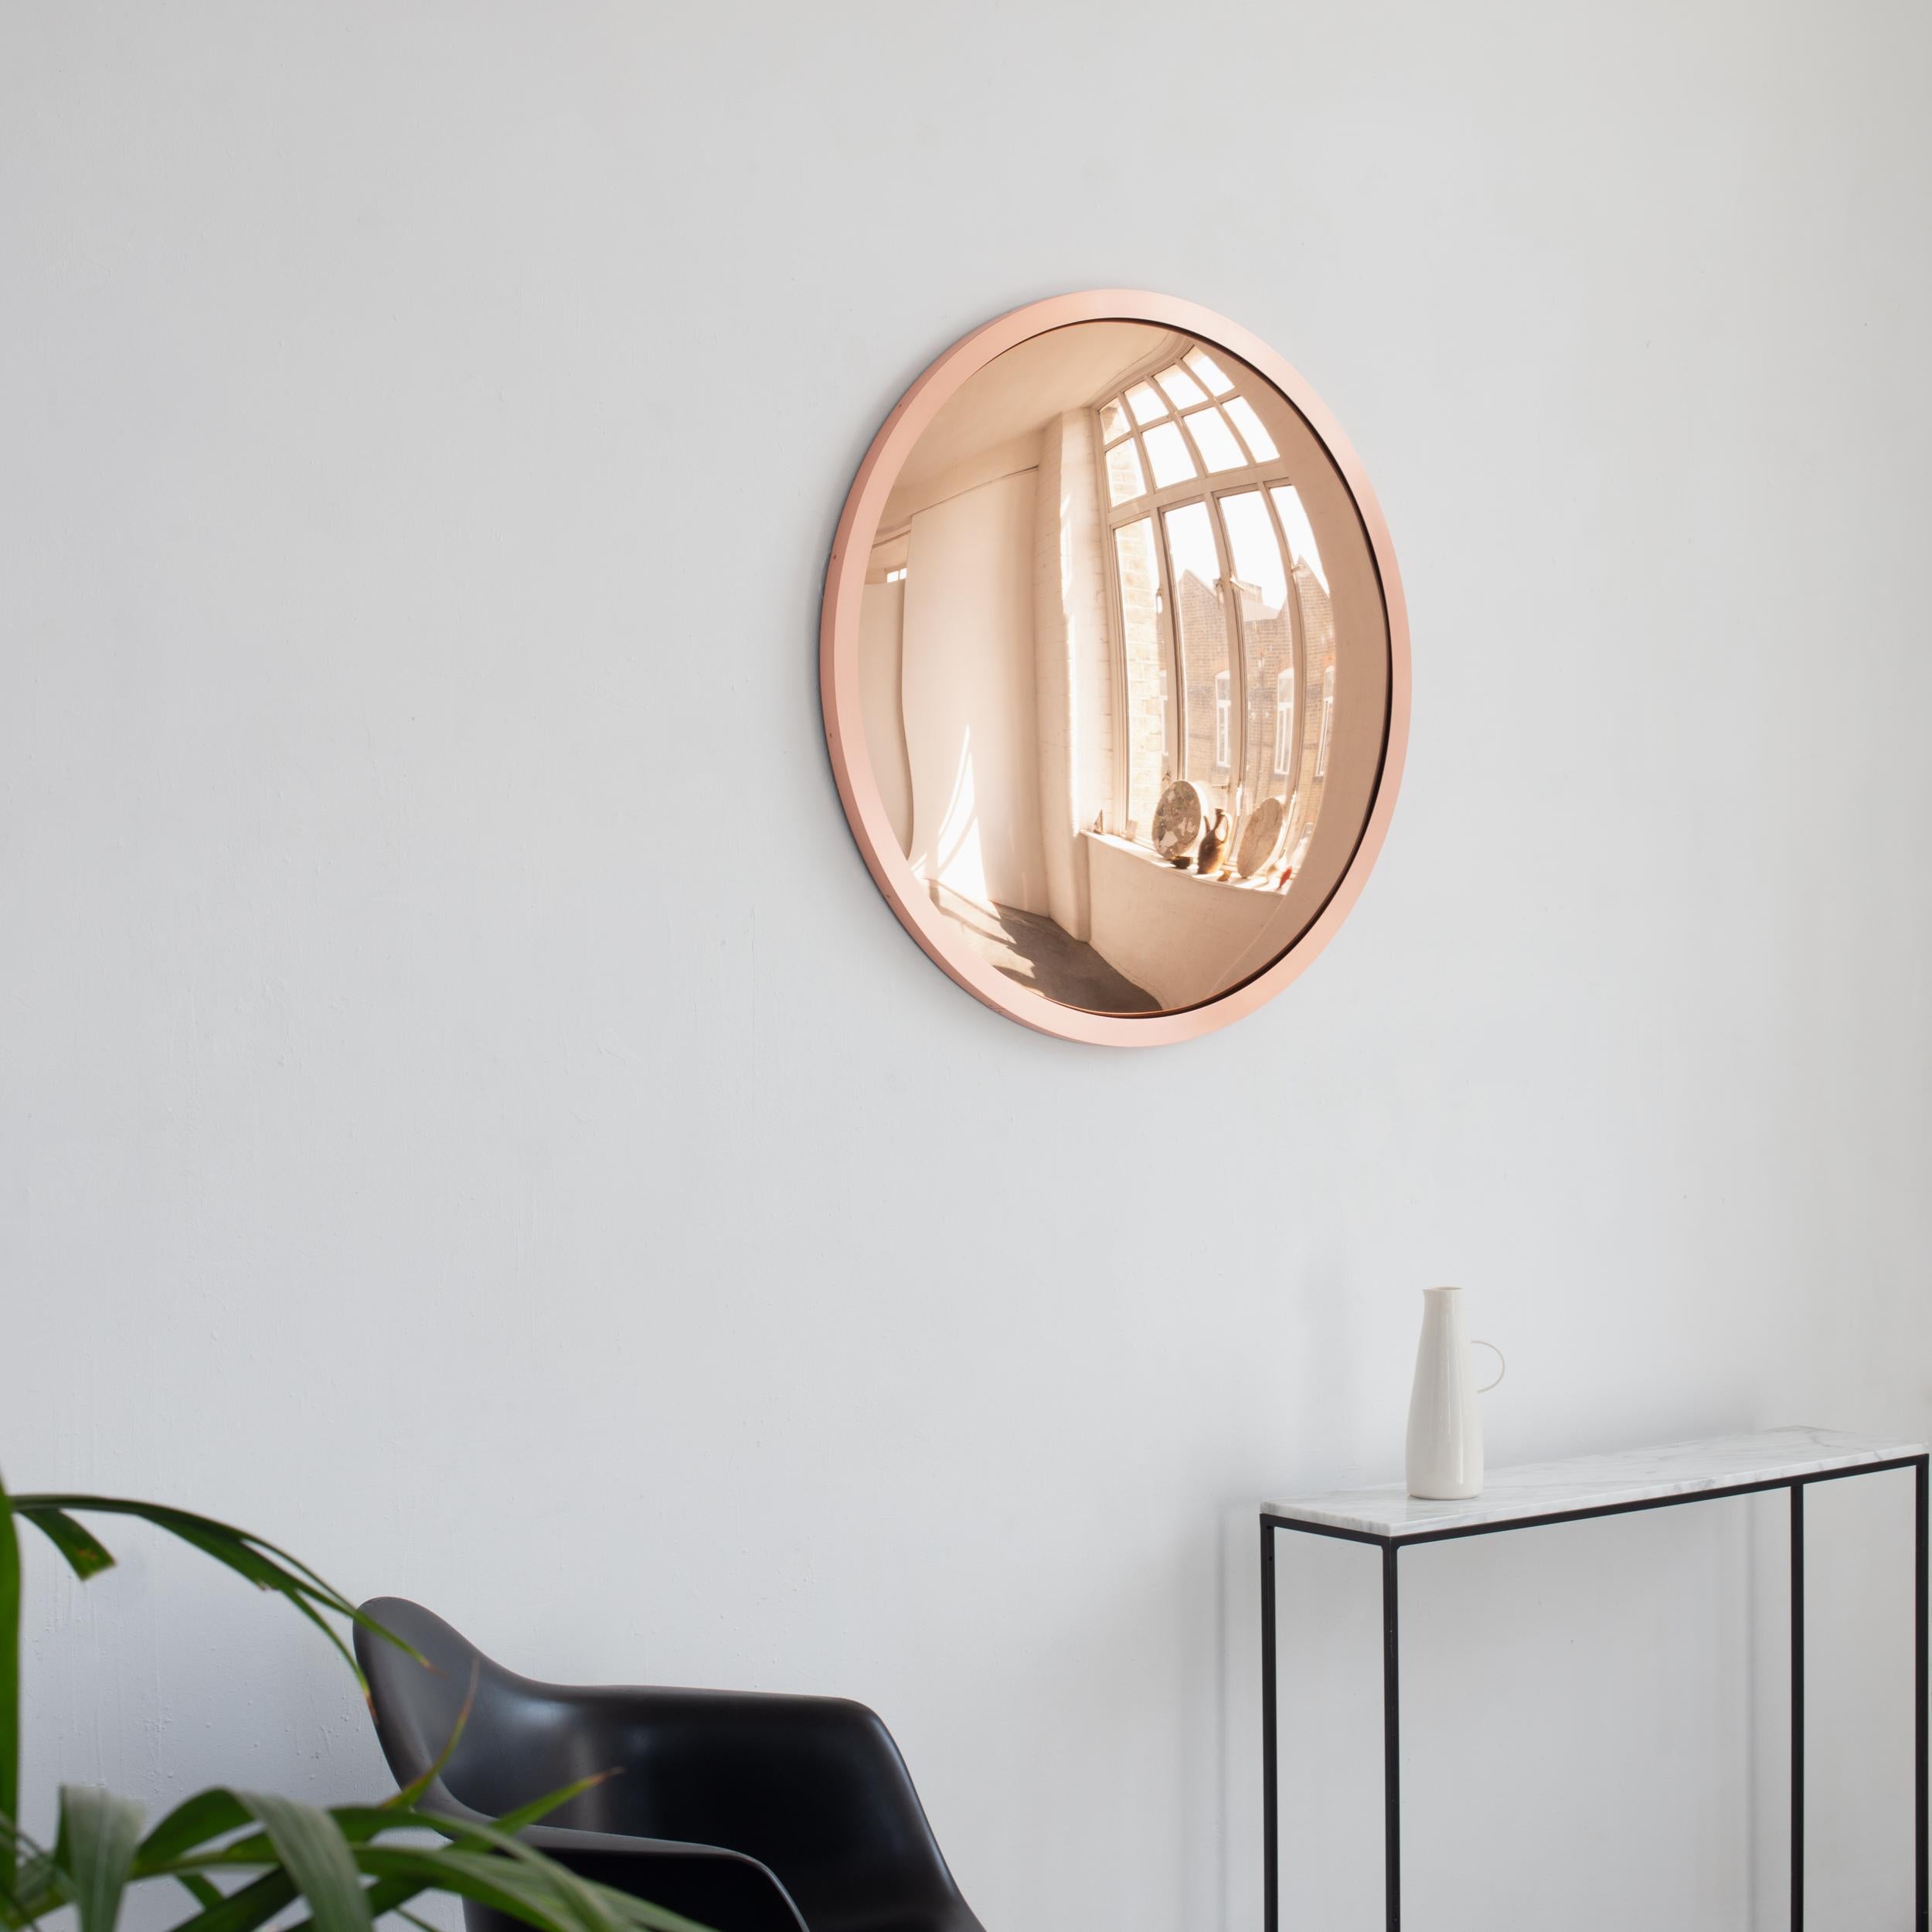 British In Stock Orbis Round Rose Gold Tinted Deco Convex Mirror, Copper Frame For Sale